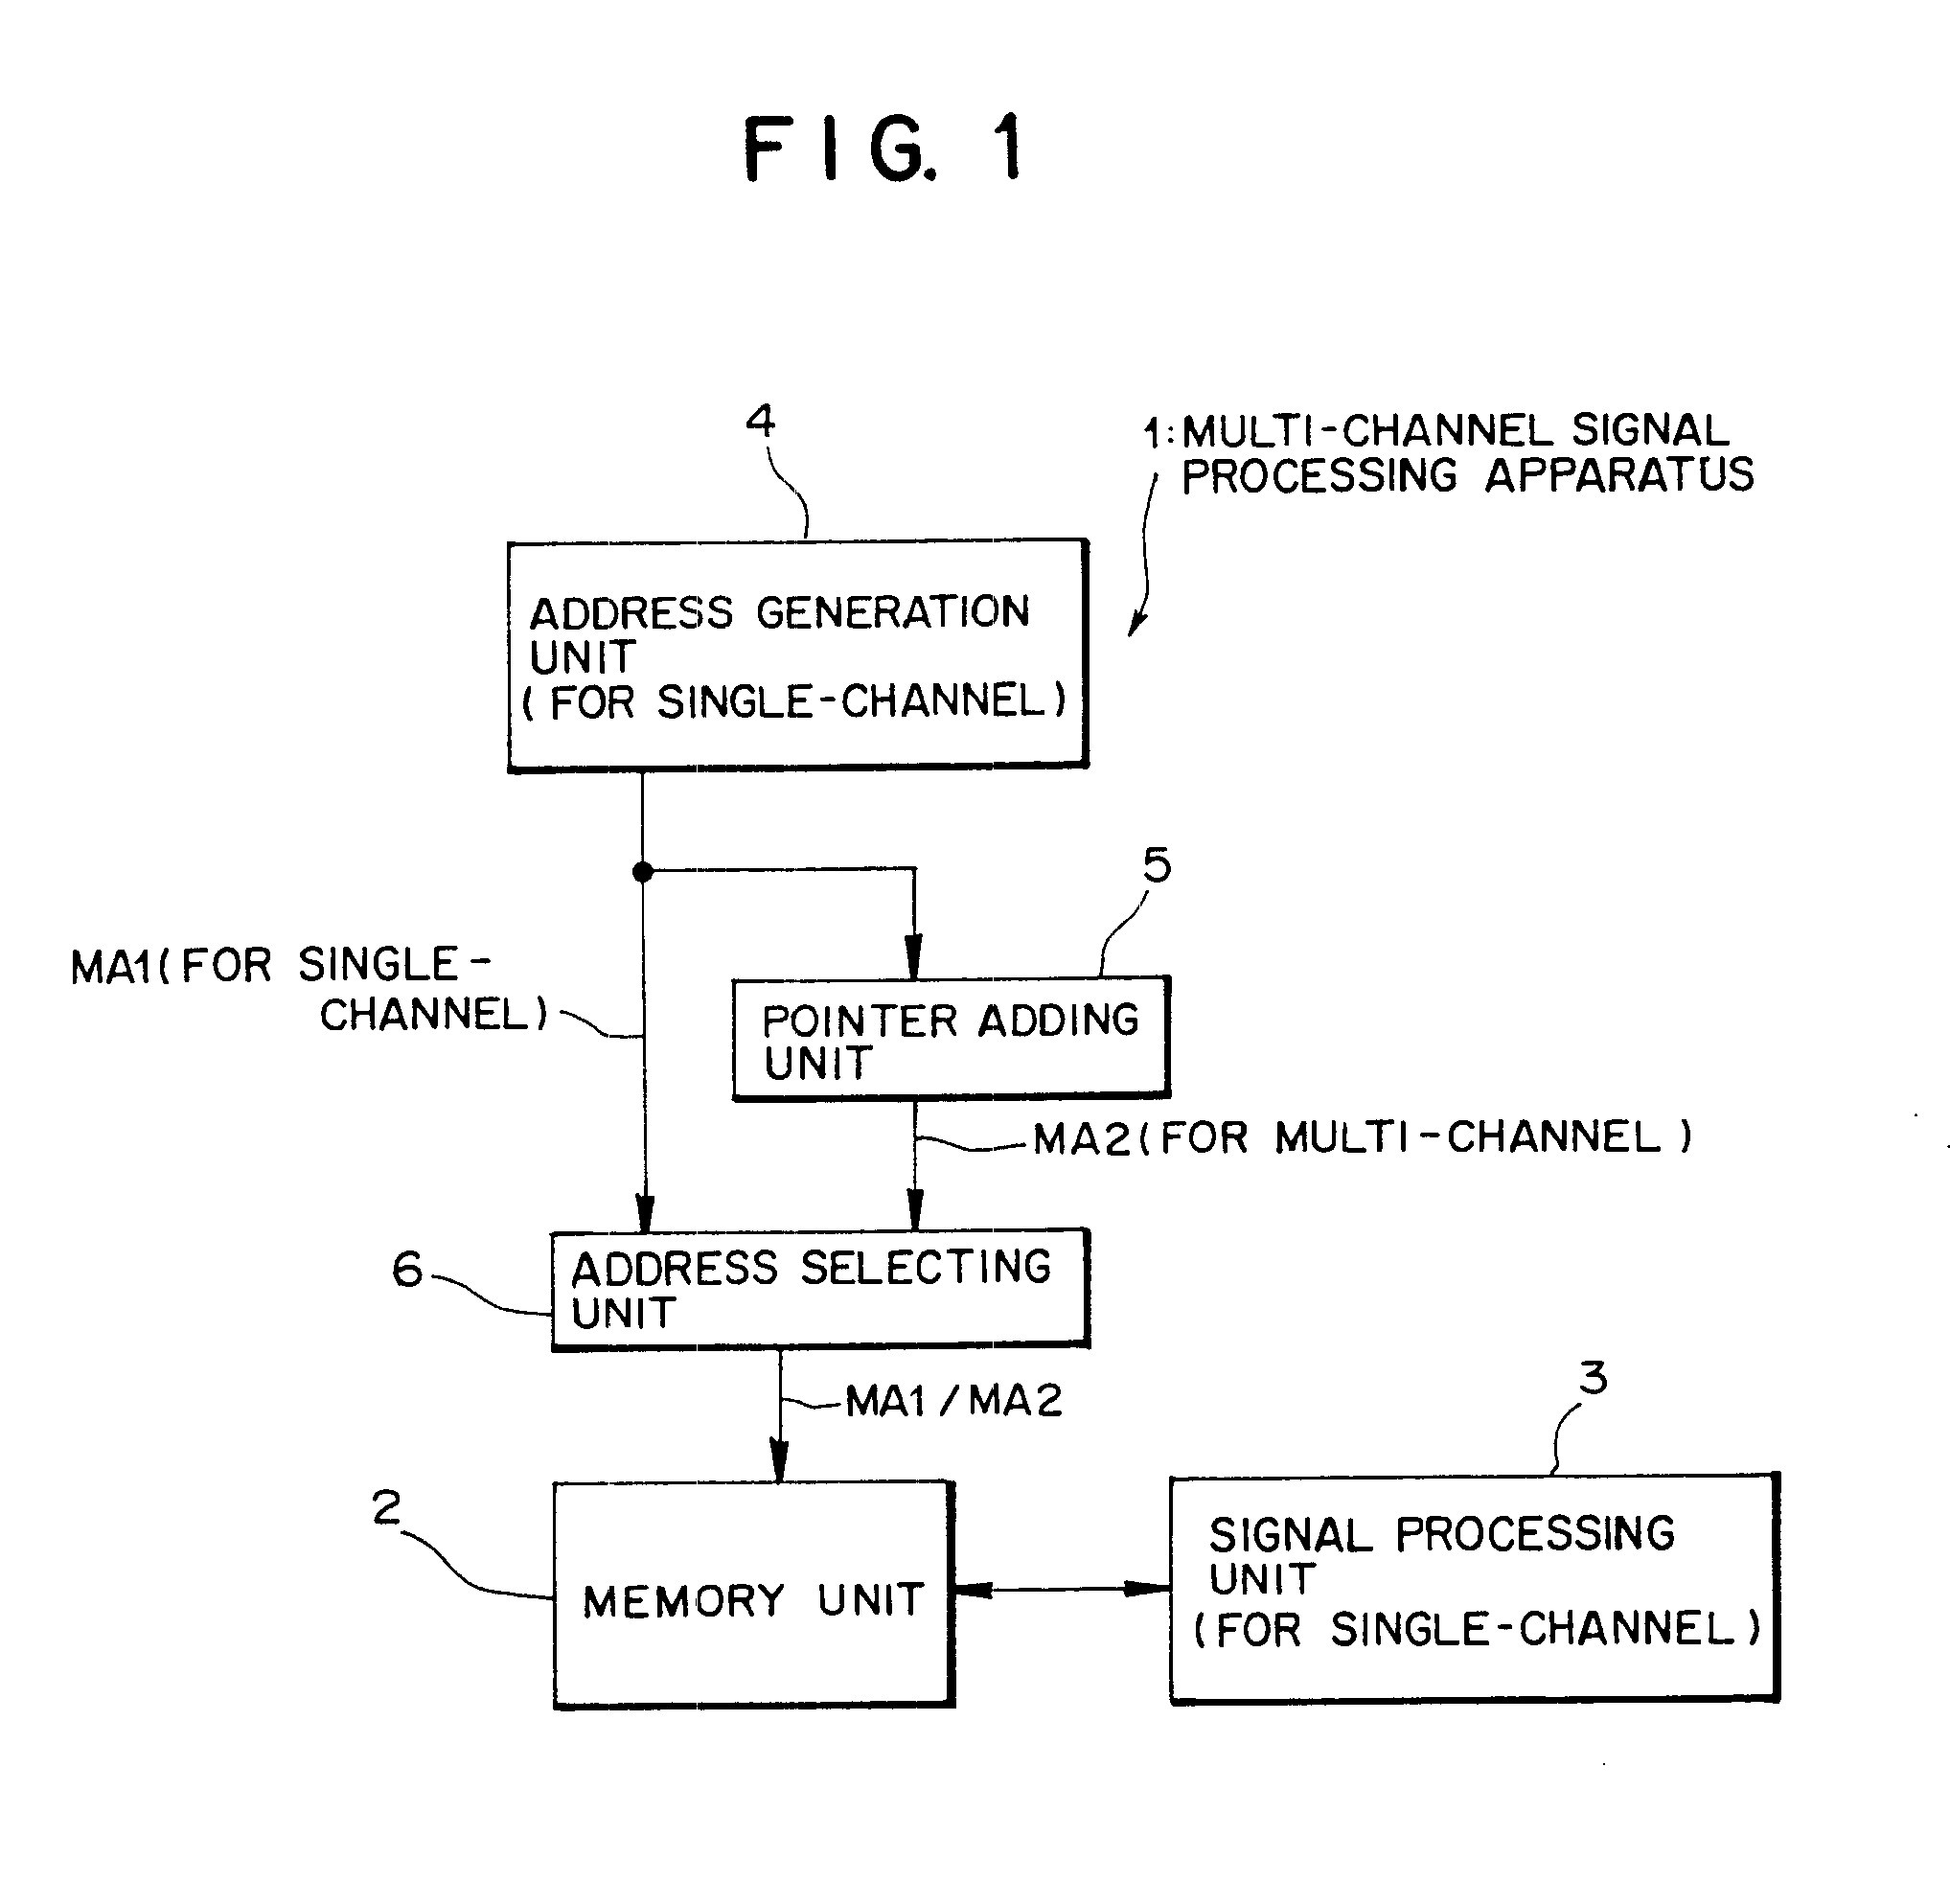 Memory management apparatus in a multi-channel signal processor